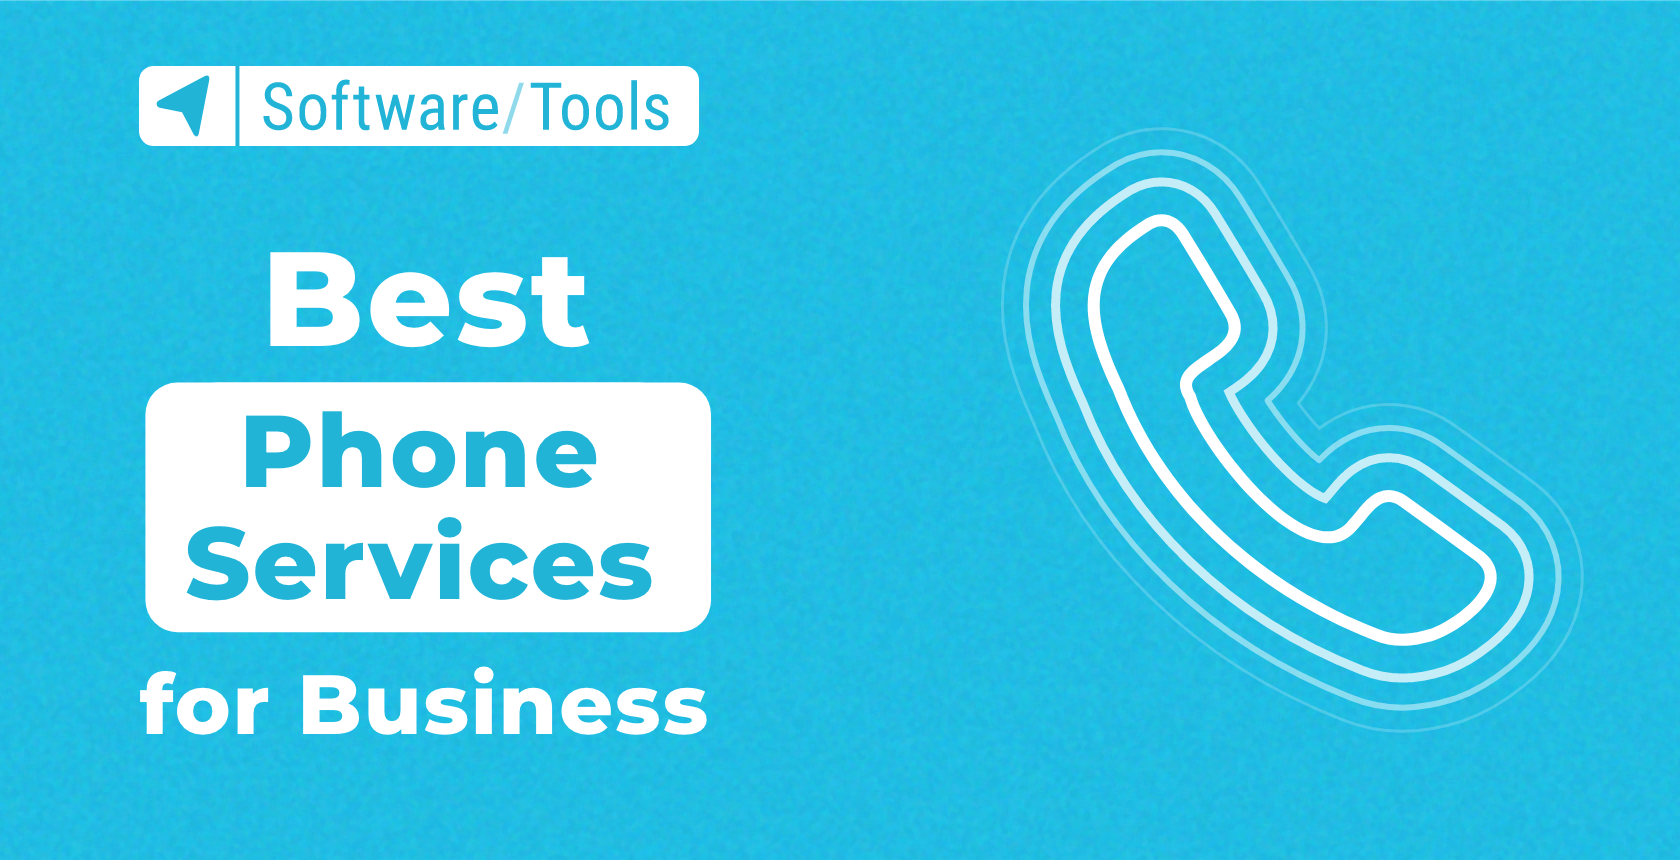 The Best Phone Services for Business in 2023